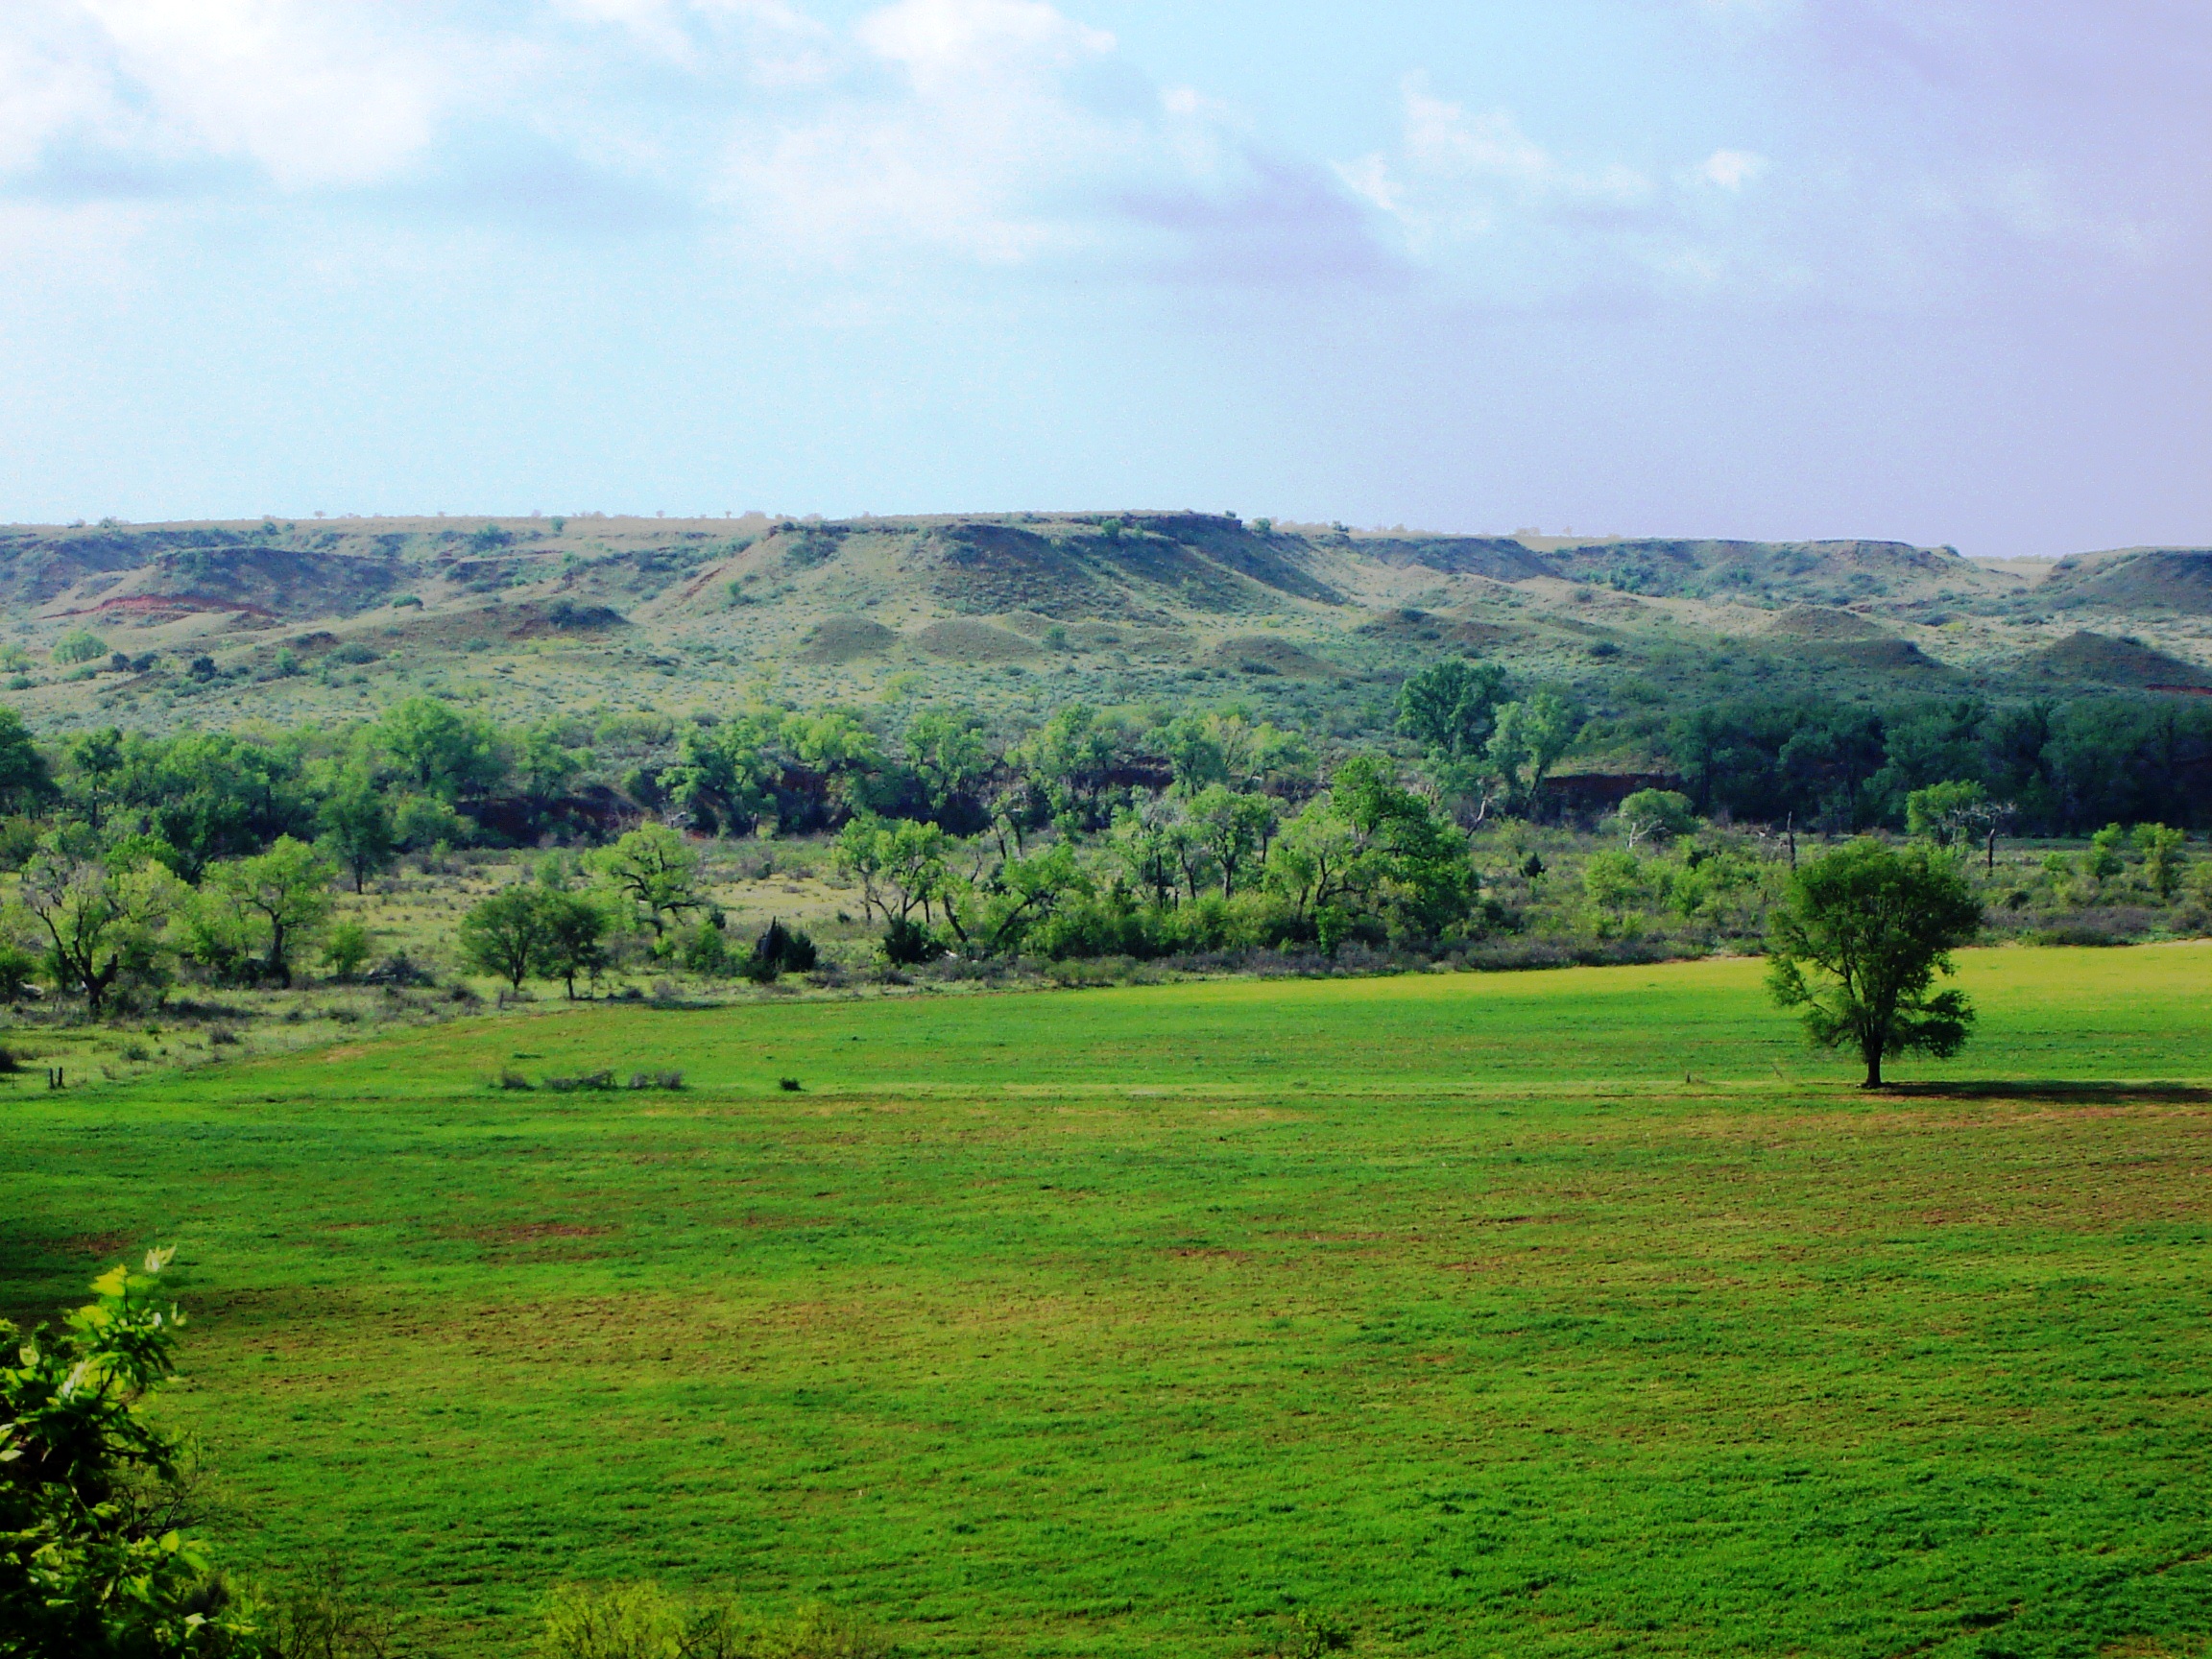 A new web-based land-use tool is available at the Texas Land Trends website